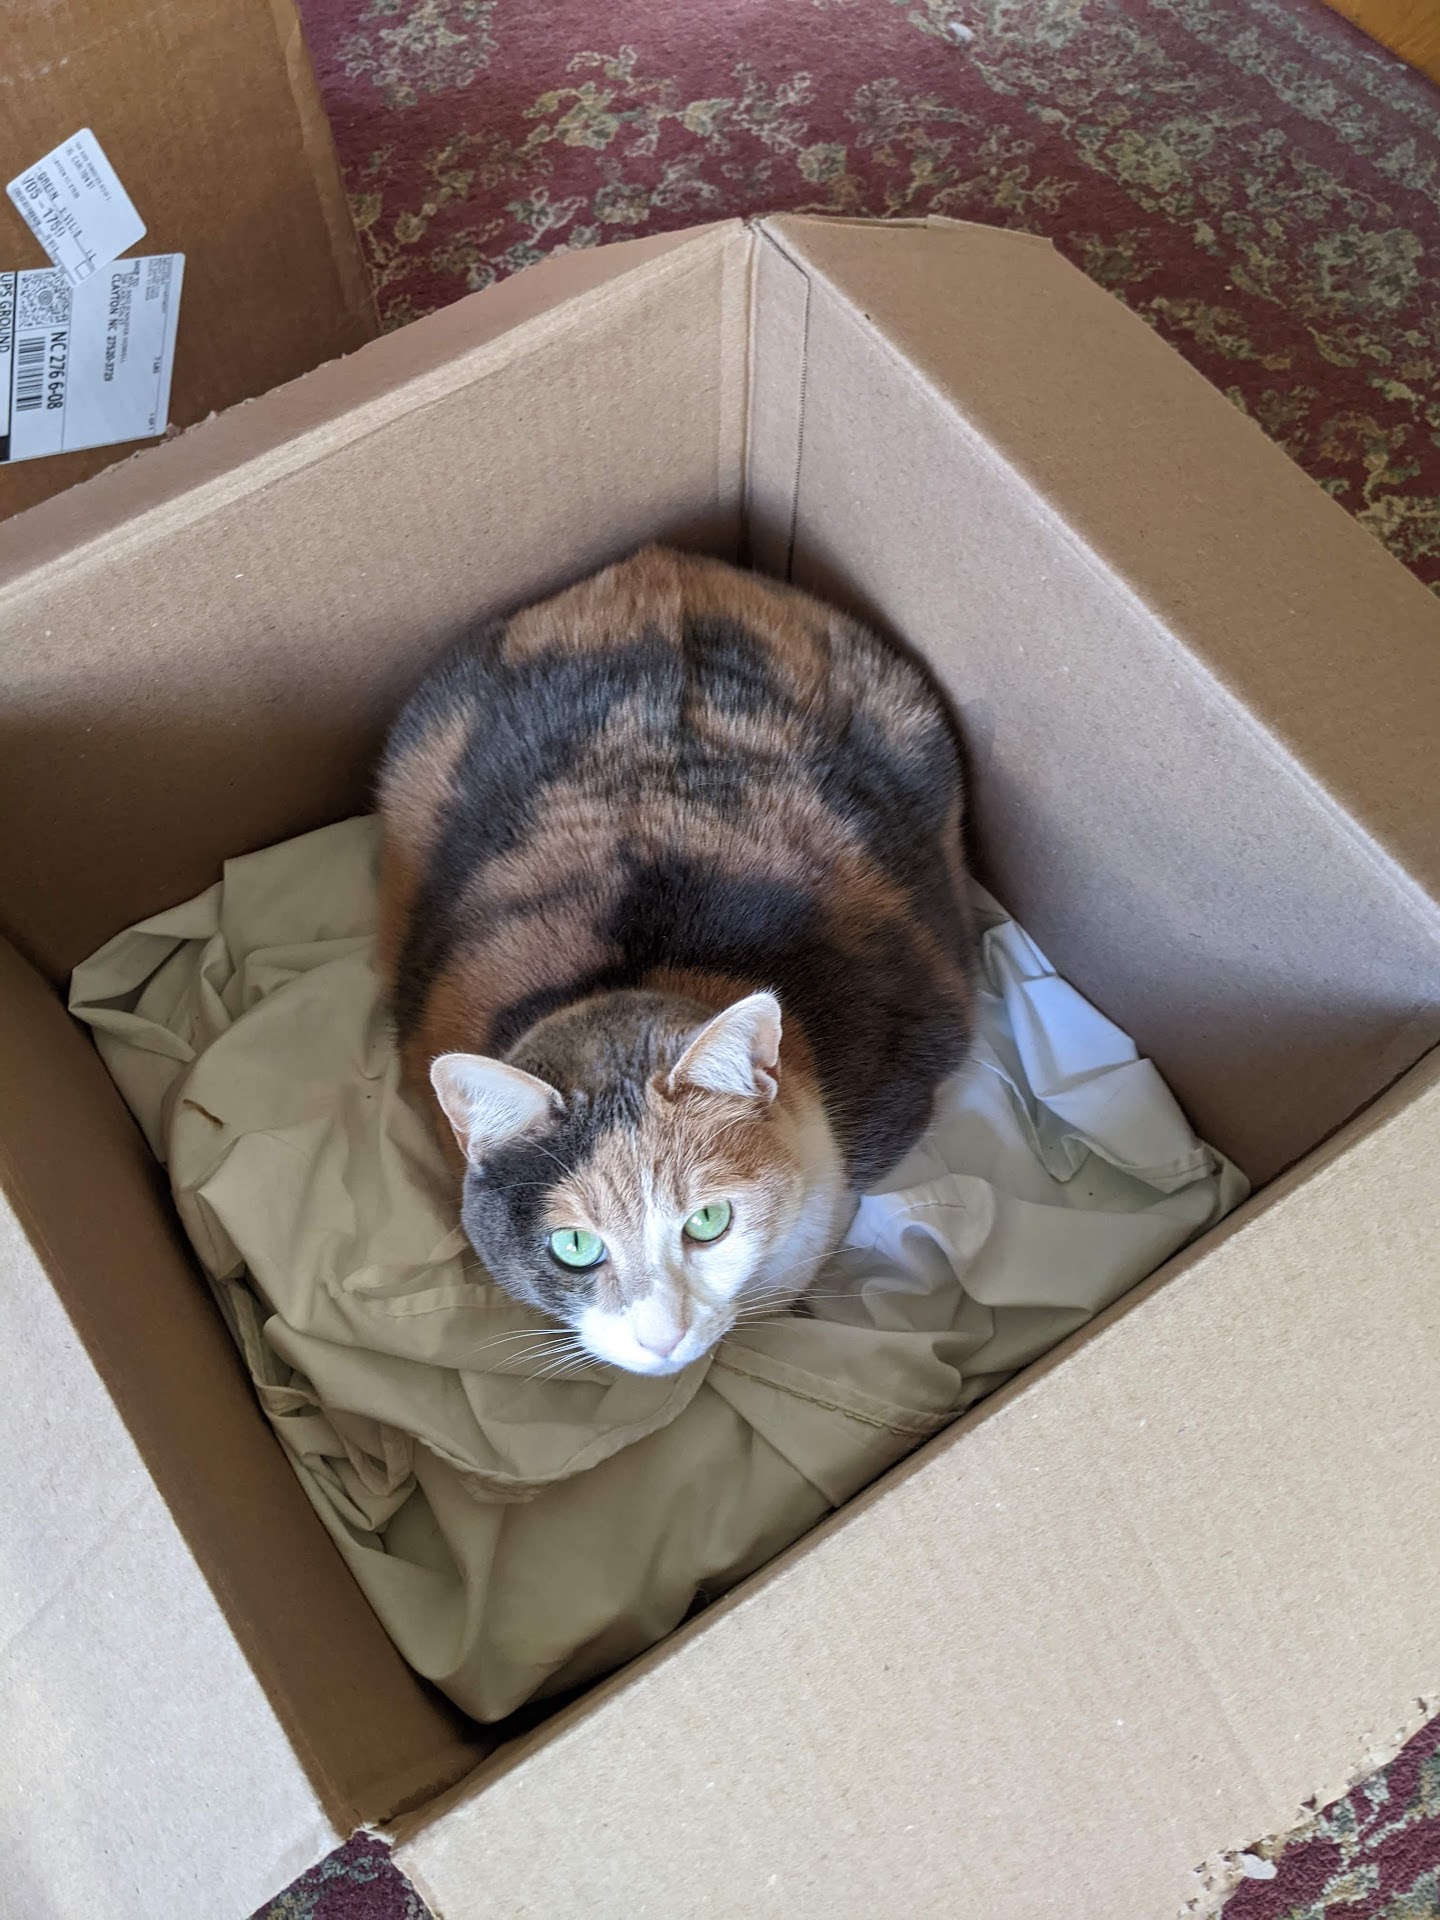 A diluted calico cat sitting in a cardboard box with a white sheet on the inside.